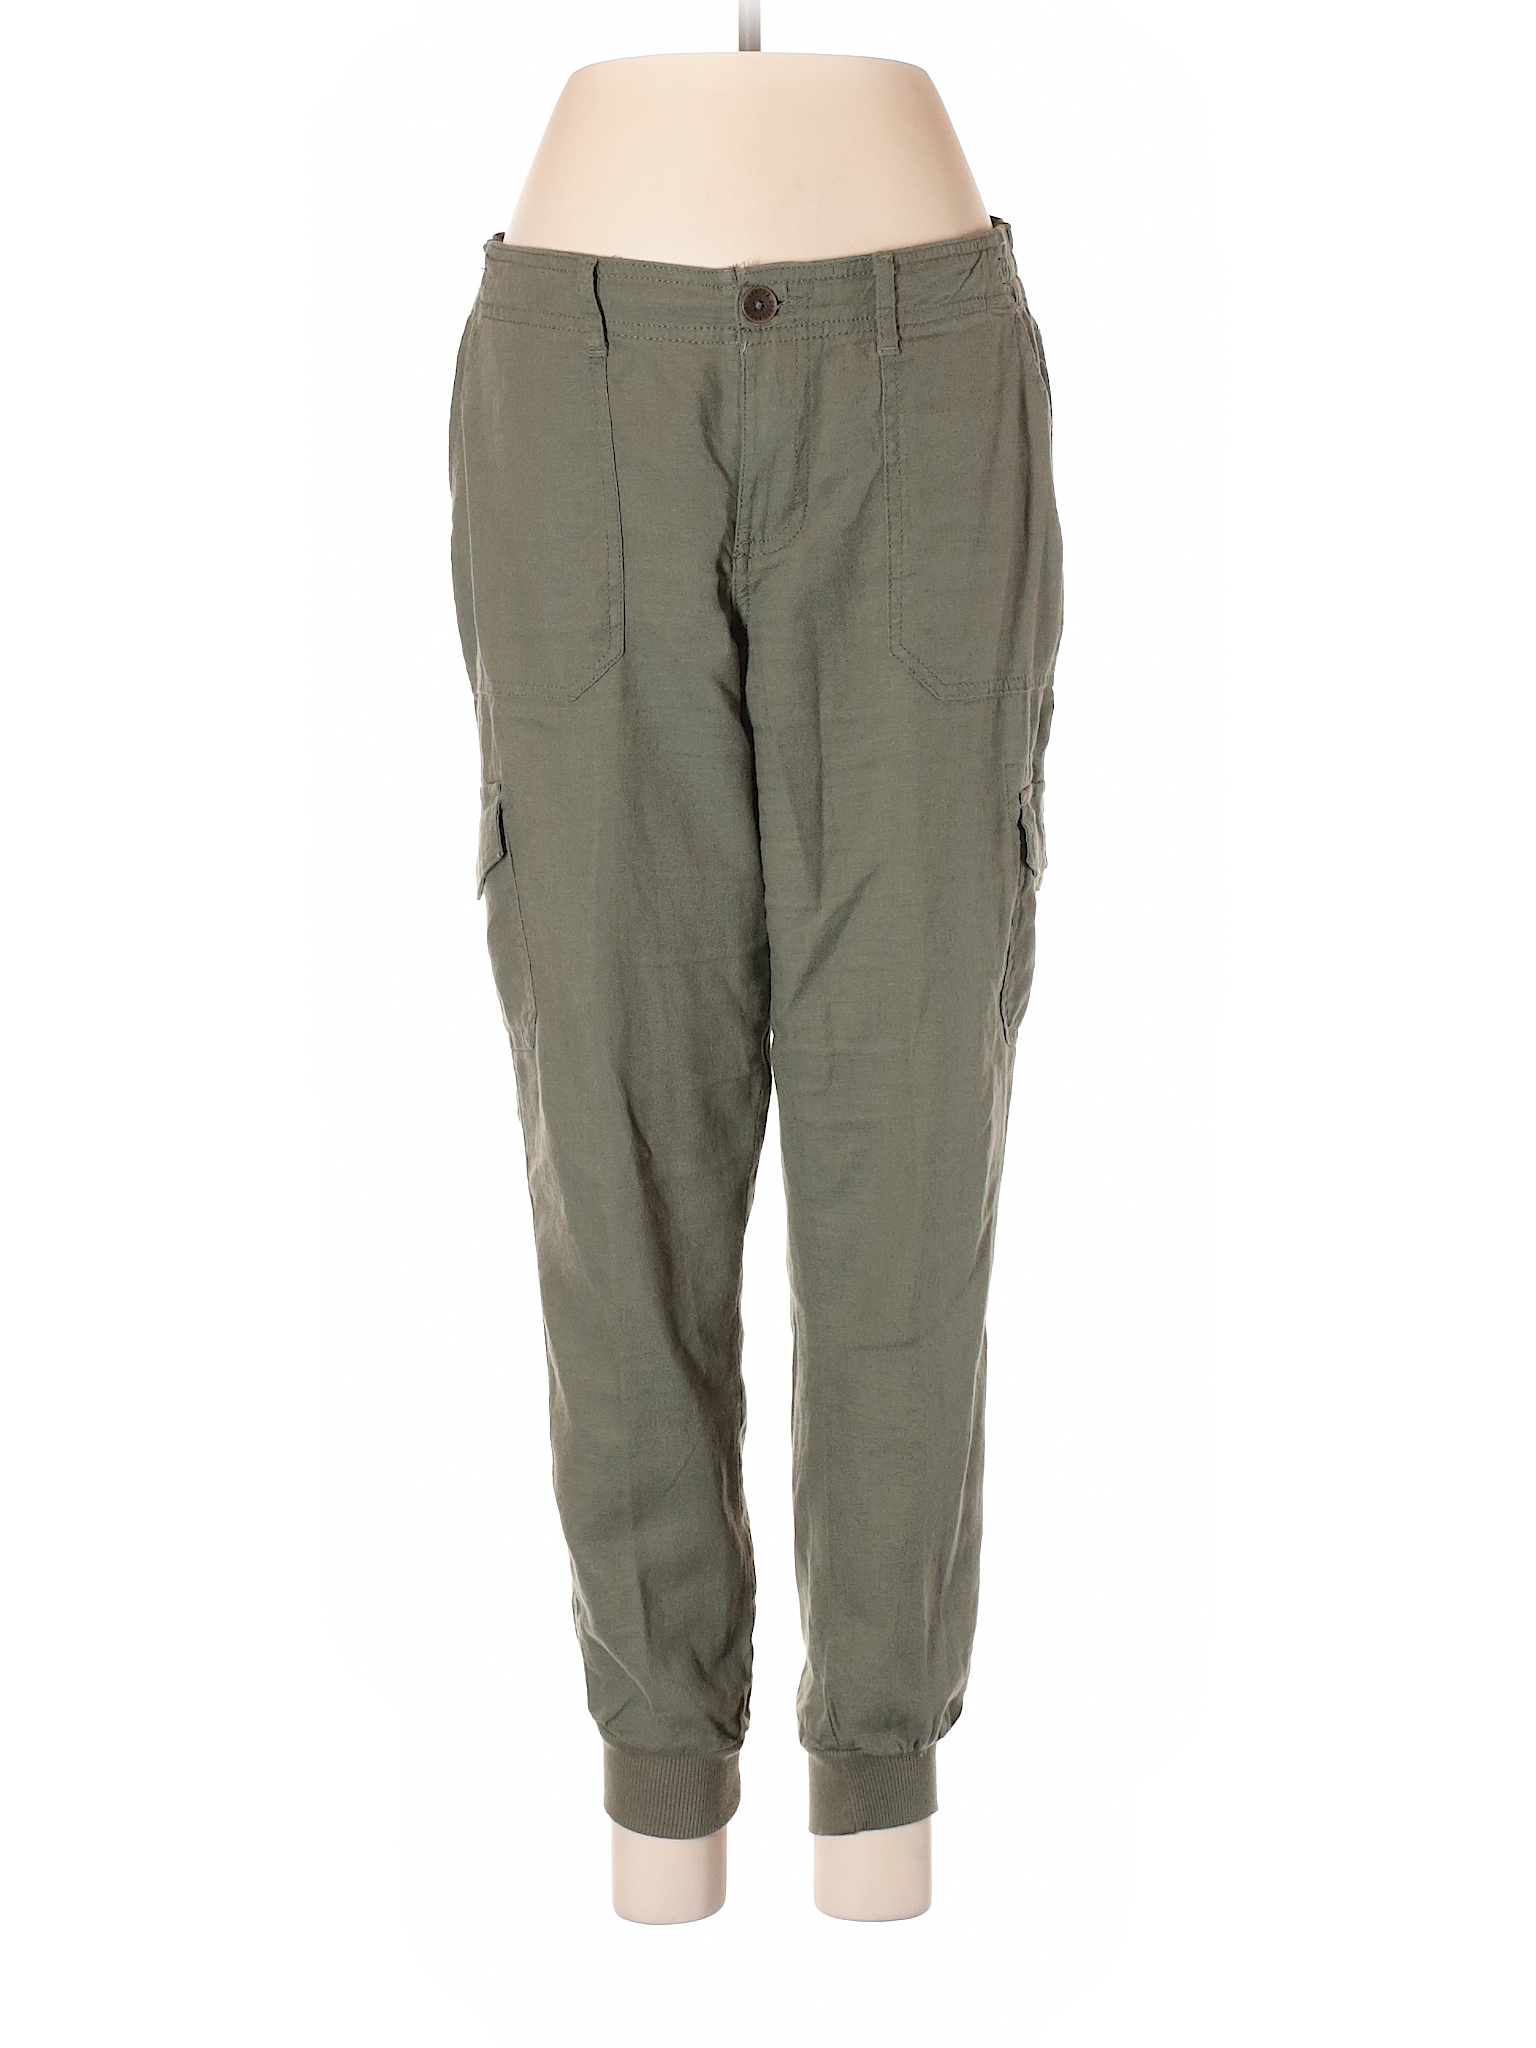 SONOMA life + style Solid Dark Green Cargo Pants Size 6 - 75% off | thredUP